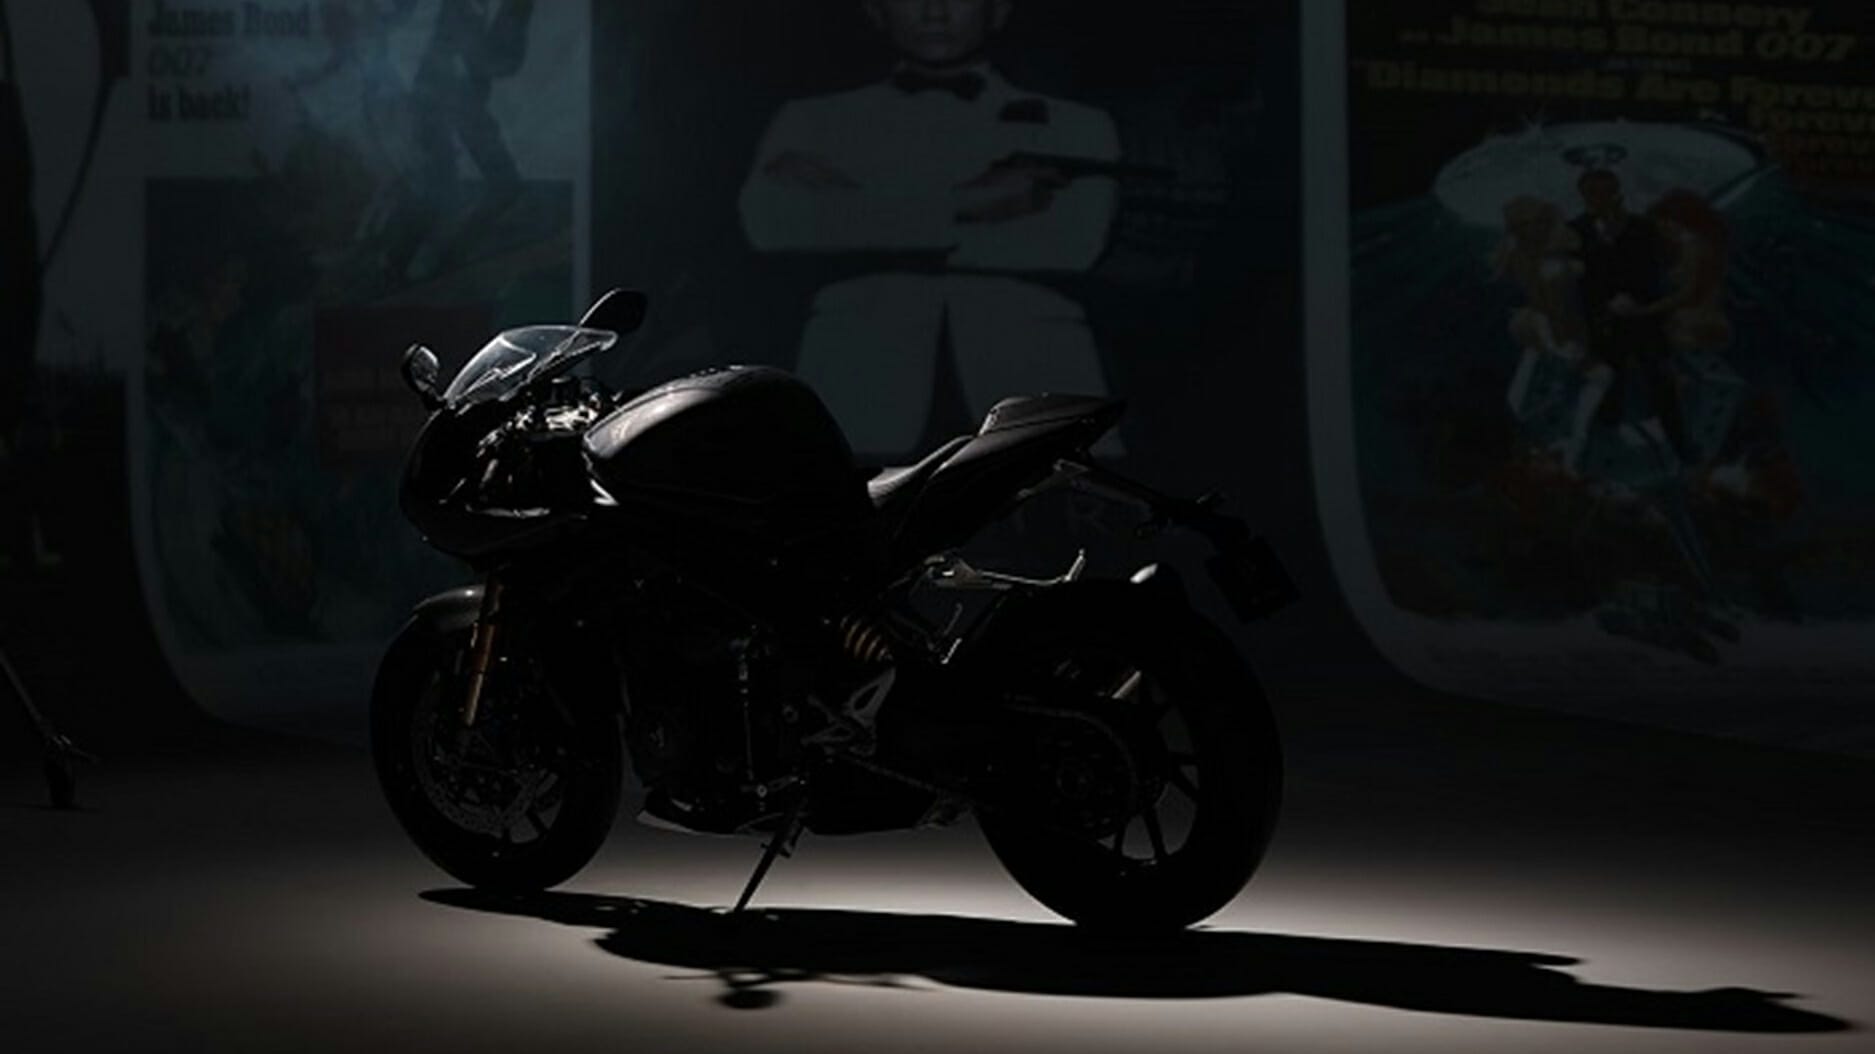 Triumph announces new 007 special model - MOTORCYCLES.NEWS